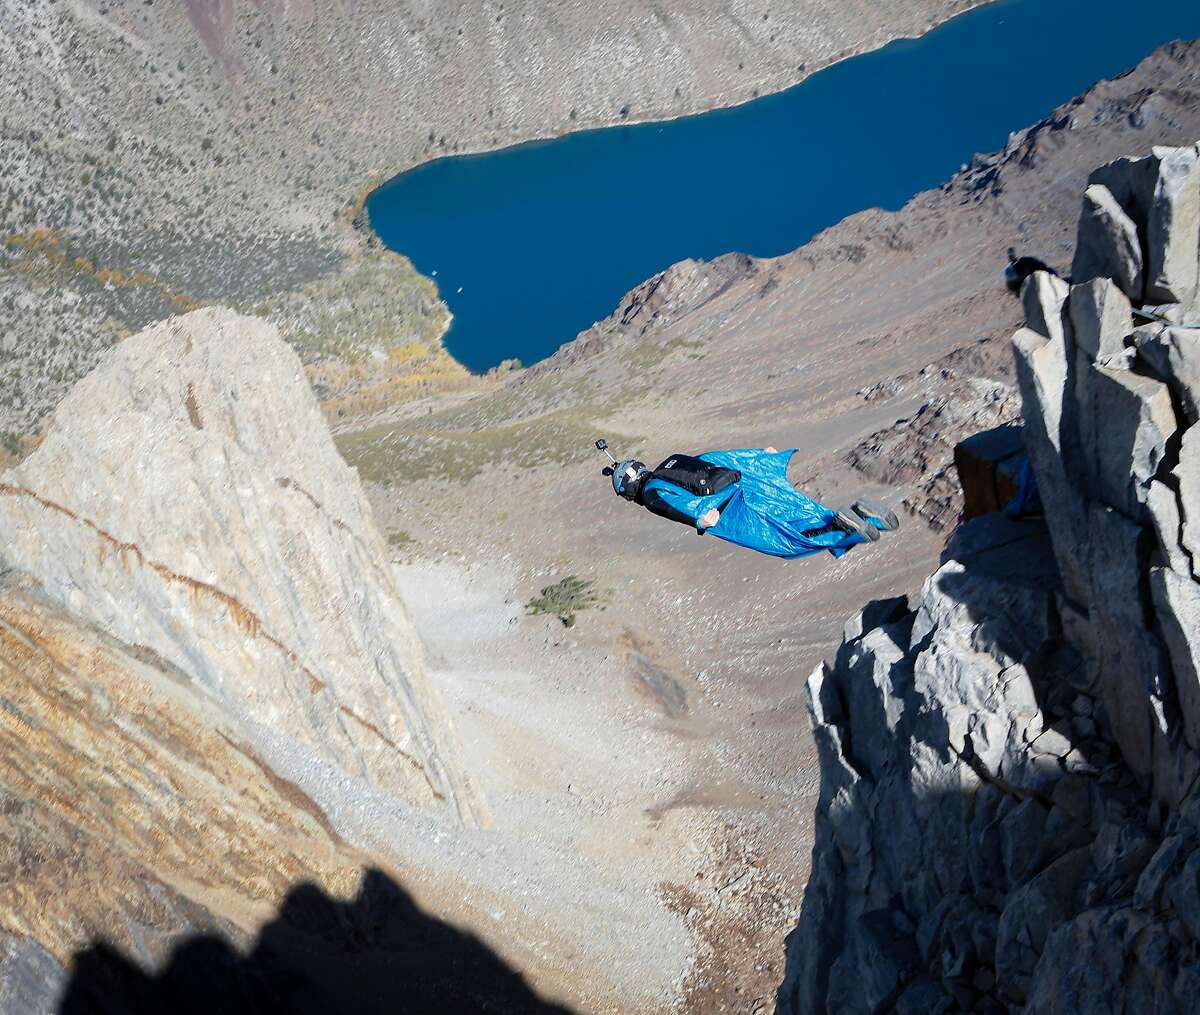 Daniel Ristow jumps from an exit point on Mount Morrison in order to execute a wingsuit base jump on Friday, Oct. 11, 2019 near Convict Lake, which is visible in the background.